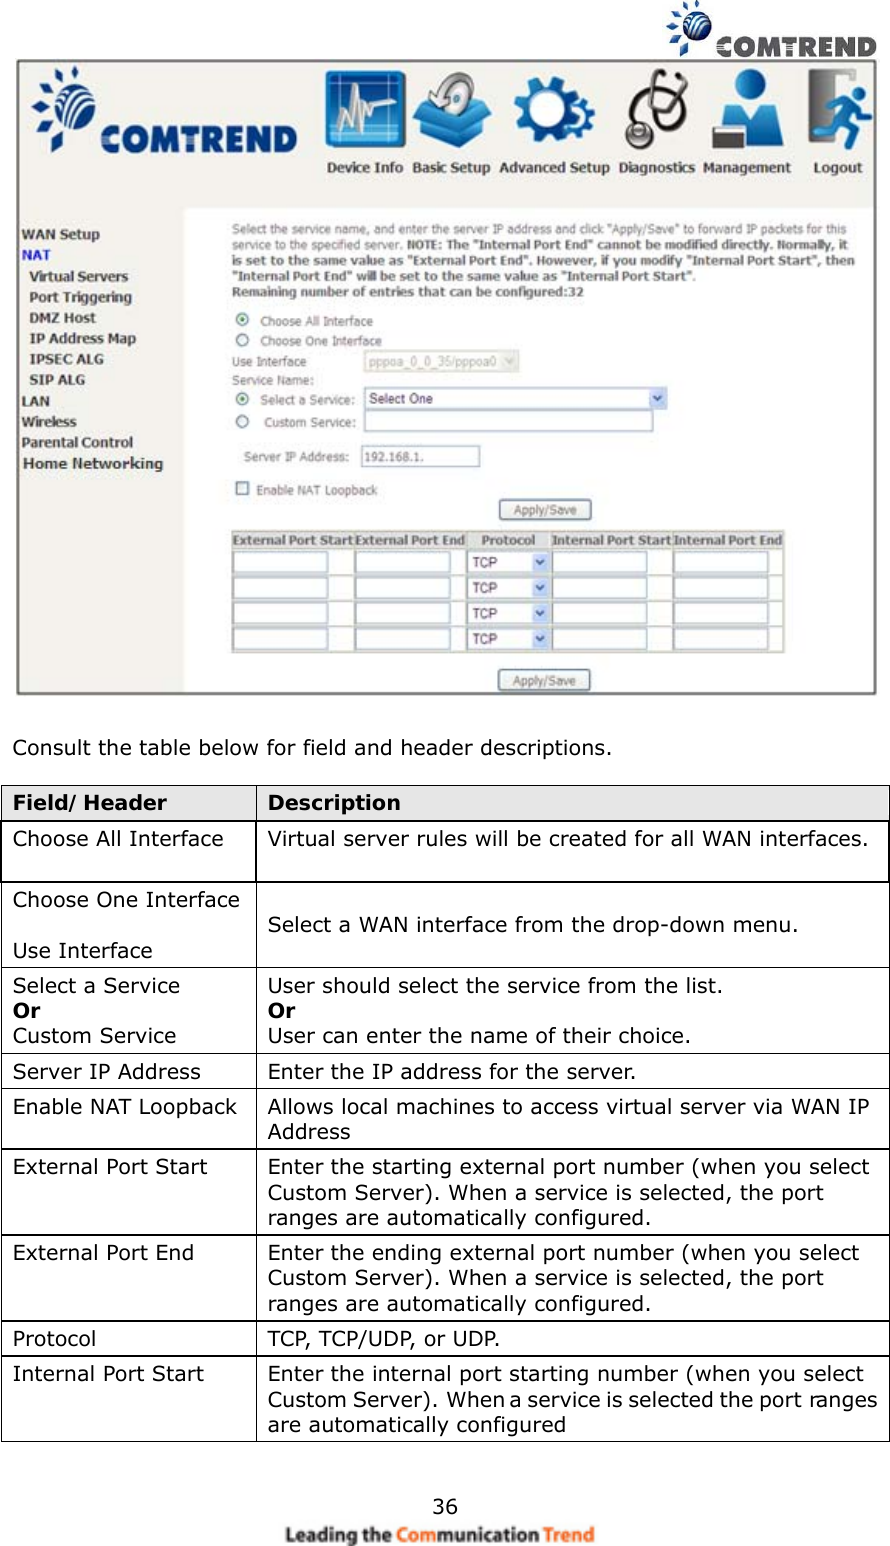    36 Consult the table below for field and header descriptions.  Field/Header  Description Choose All InterfaceVirtual server rules will be created for all WAN interfaces. Choose One Interface  Use Interface  Select a WAN interface from the drop-down menu. Select a Service Or  Custom Service User should select the service from the list. Or User can enter the name of their choice. Server IP Address  Enter the IP address for the server. Enable NAT Loopback  Allows local machines to access virtual server via WAN IP Address External Port Start  Enter the starting external port number (when you select Custom Server). When a service is selected, the port ranges are automatically configured. External Port End  Enter the ending external port number (when you select Custom Server). When a service is selected, the port ranges are automatically configured. Protocol  TCP, TCP/UDP, or UDP. Internal Port Start  Enter the internal port starting number (when you select Custom Server). When a service is selected the port ranges are automatically configured 